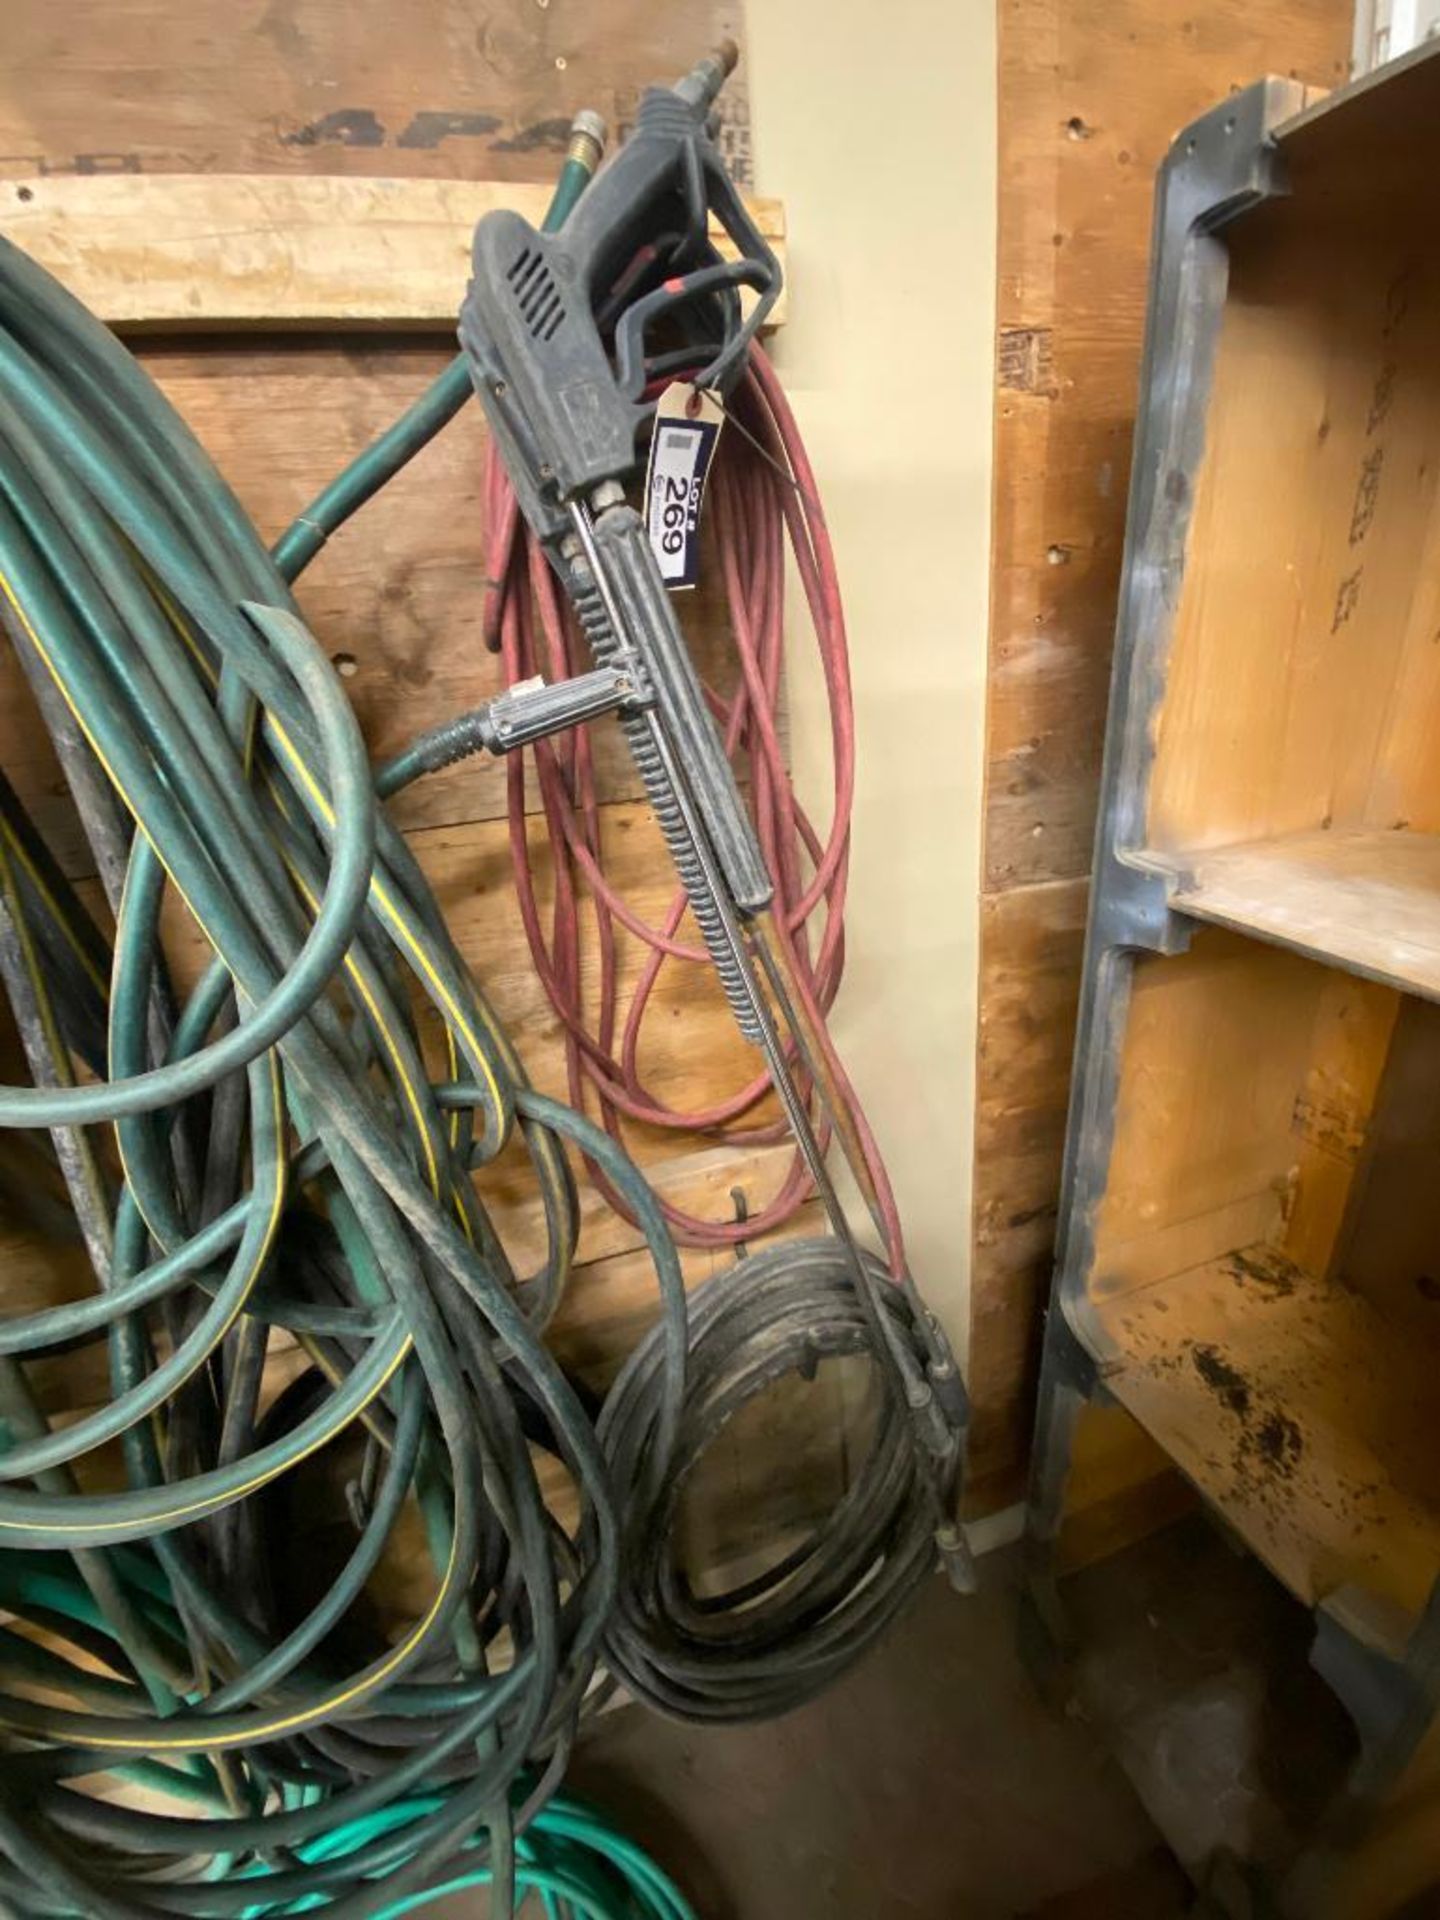 Lot of (2) Power Wash Wands and Asst. Hose.